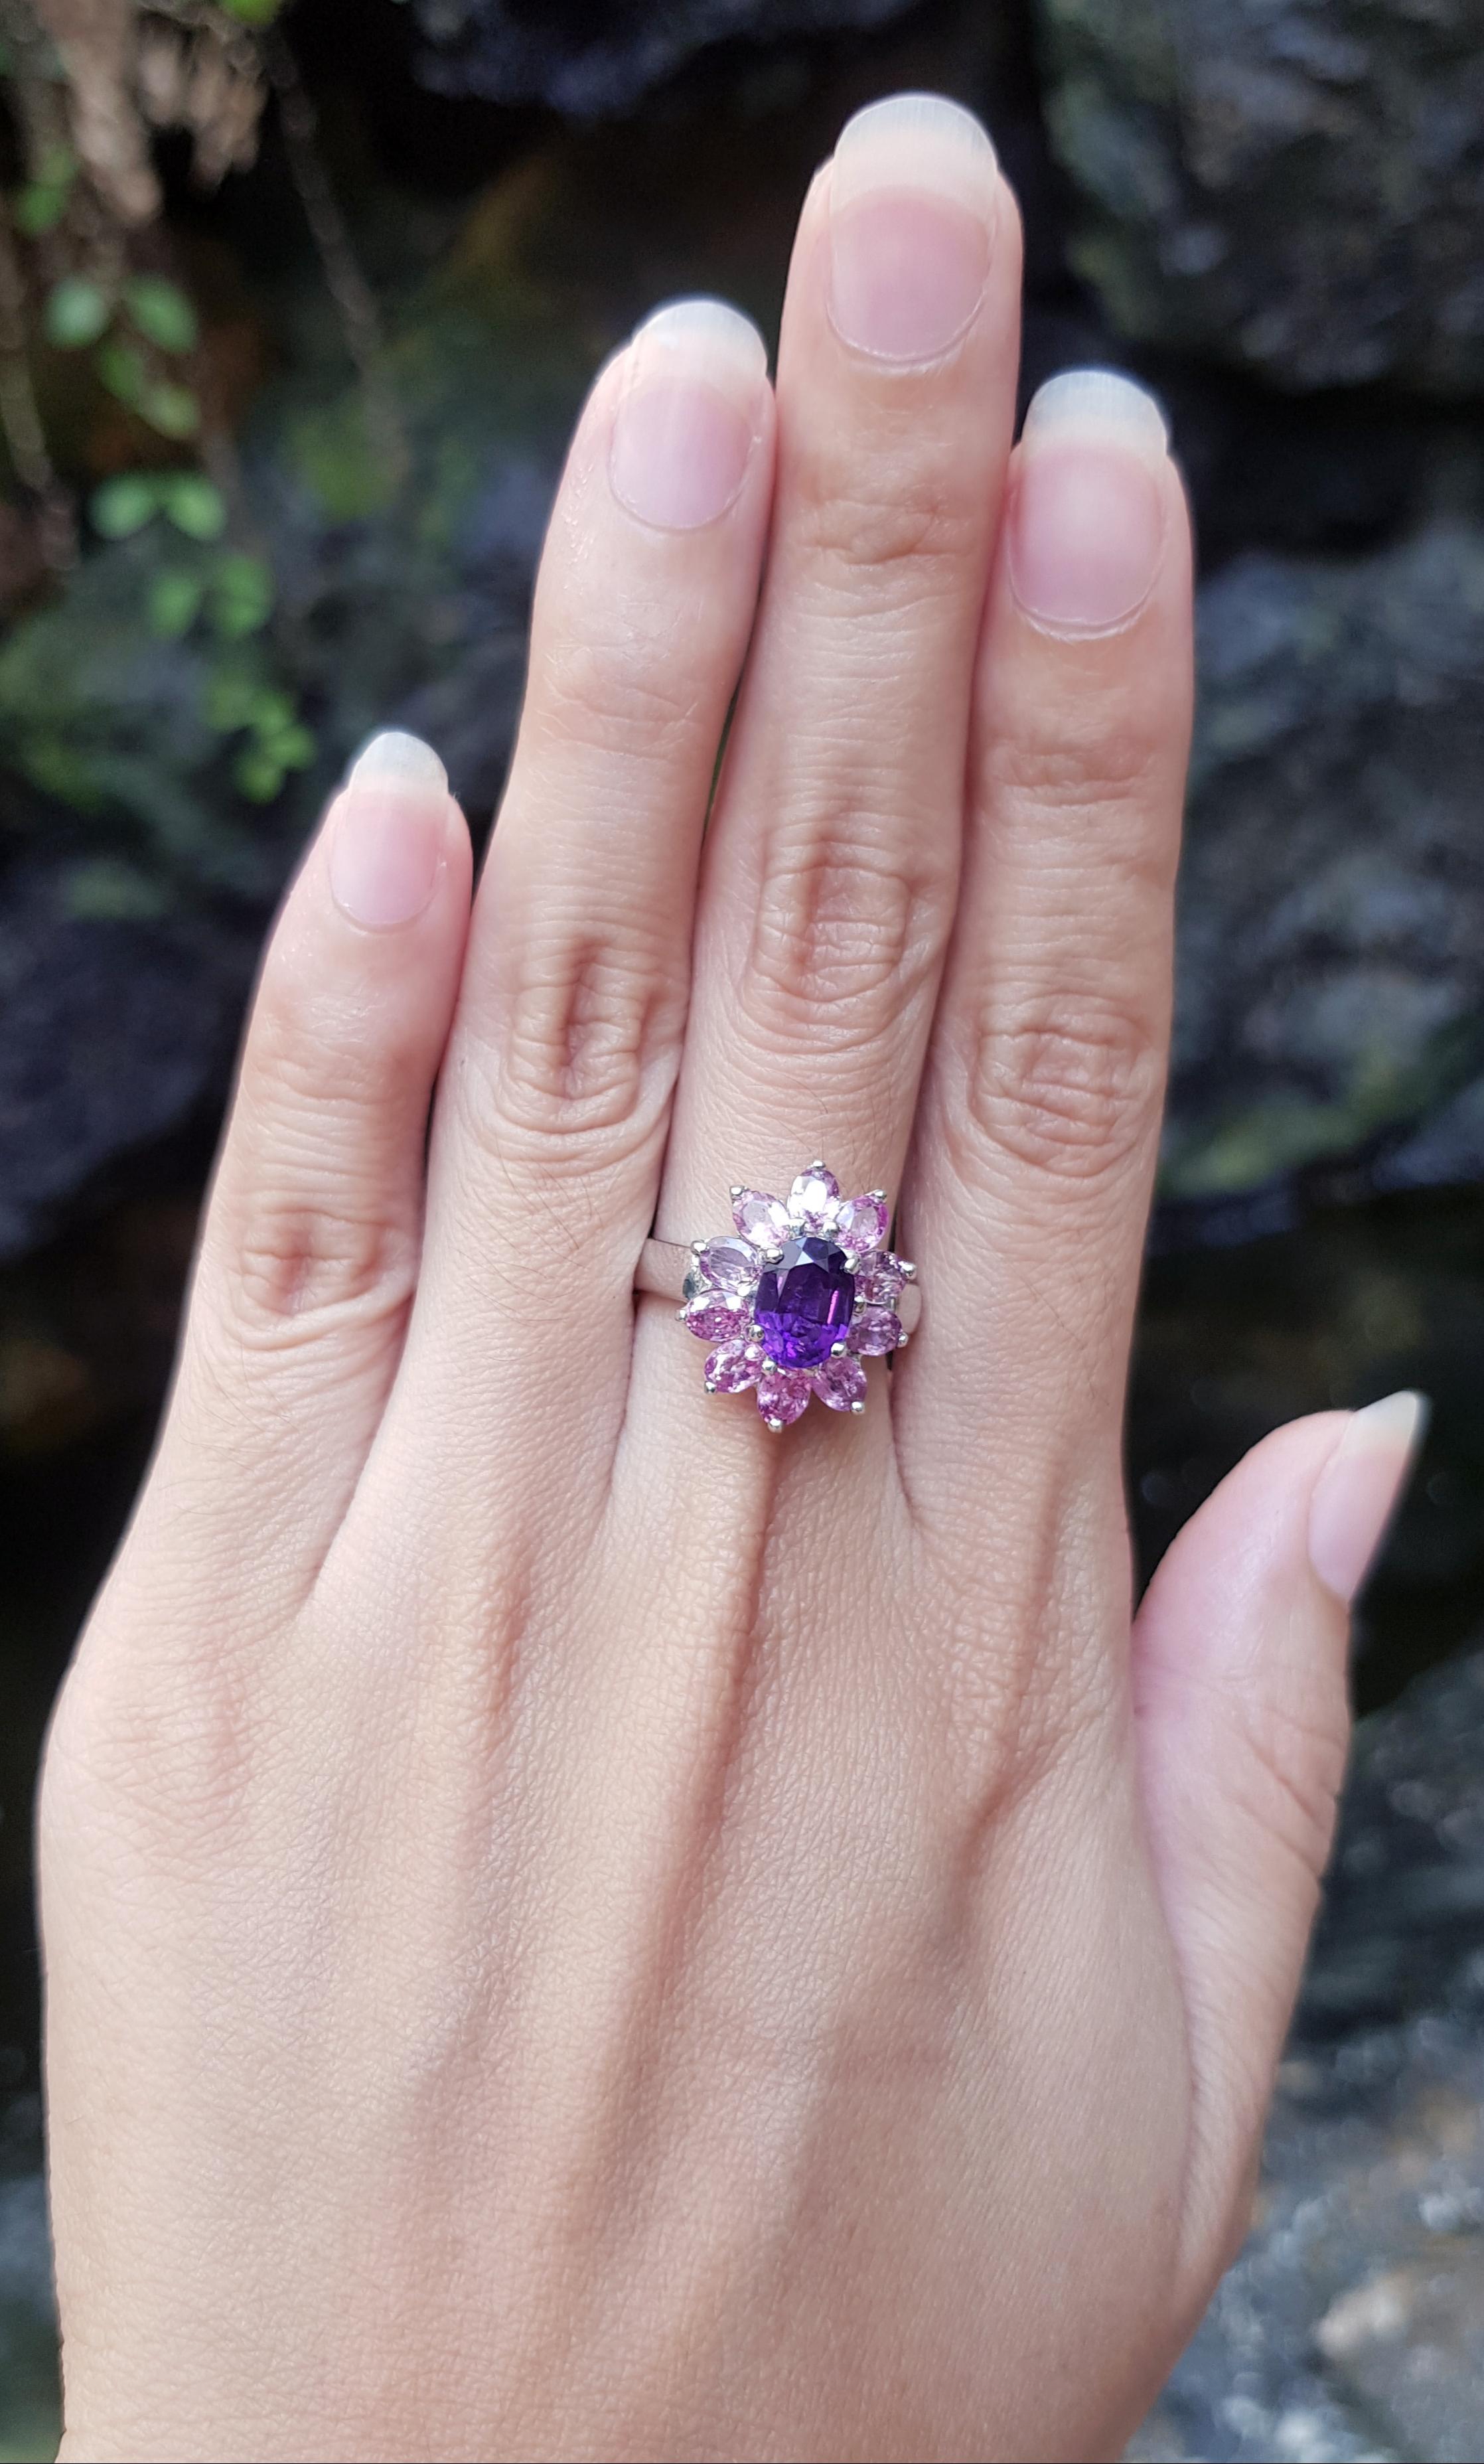 Amethyst with Pink Sapphire Ring set in Silver Settings

Width:  1.5 cm 
Length: 1.7 cm
Ring Size: 56
Total Weight: 5.23 grams

*Please note that the silver setting is plated with rhodium to promote shine and help prevent oxidation.  However, with